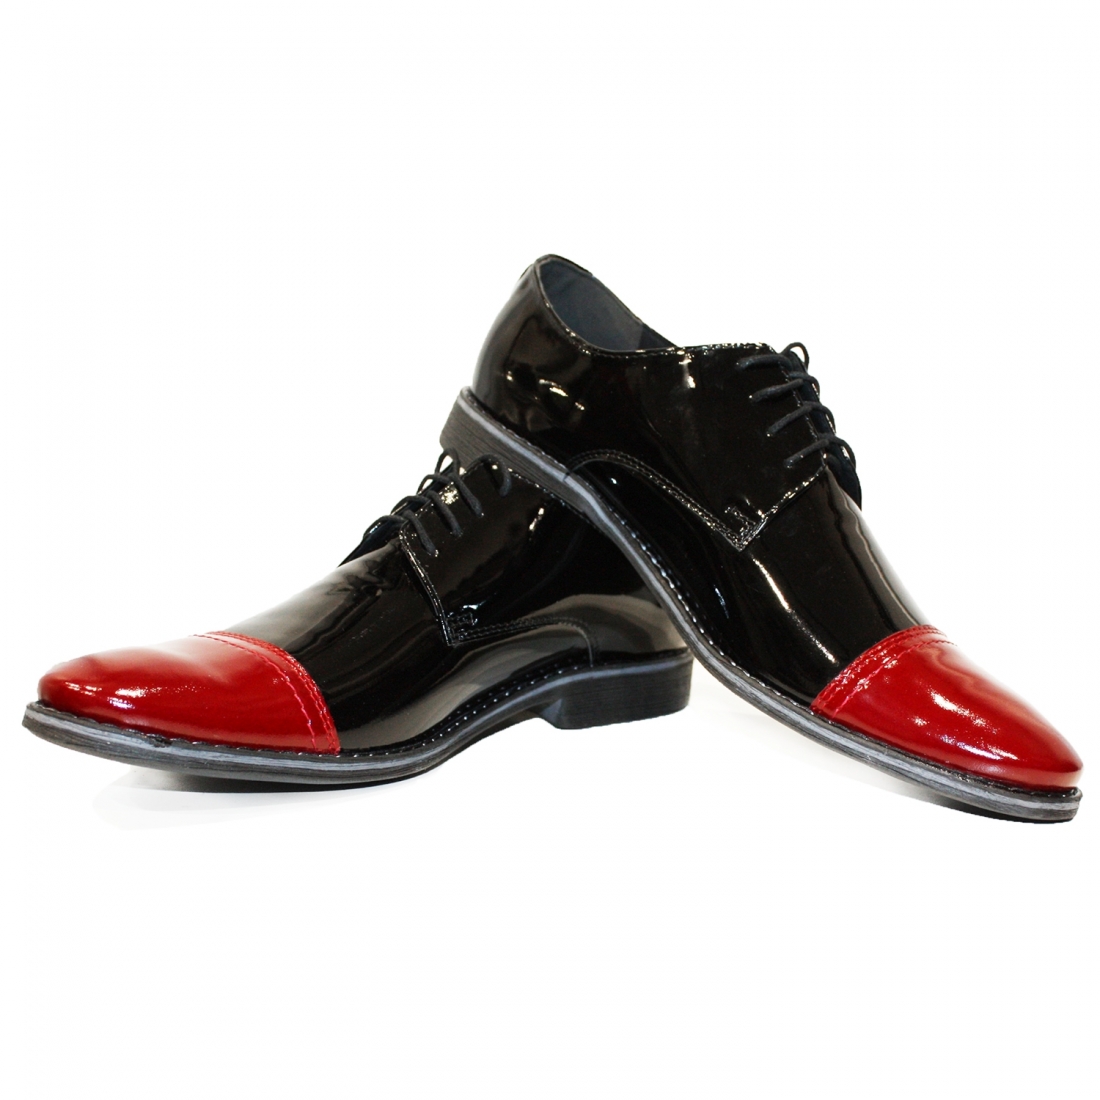 Modello Tchuberro - Classic Shoes - Handmade Colorful Italian Leather Shoes